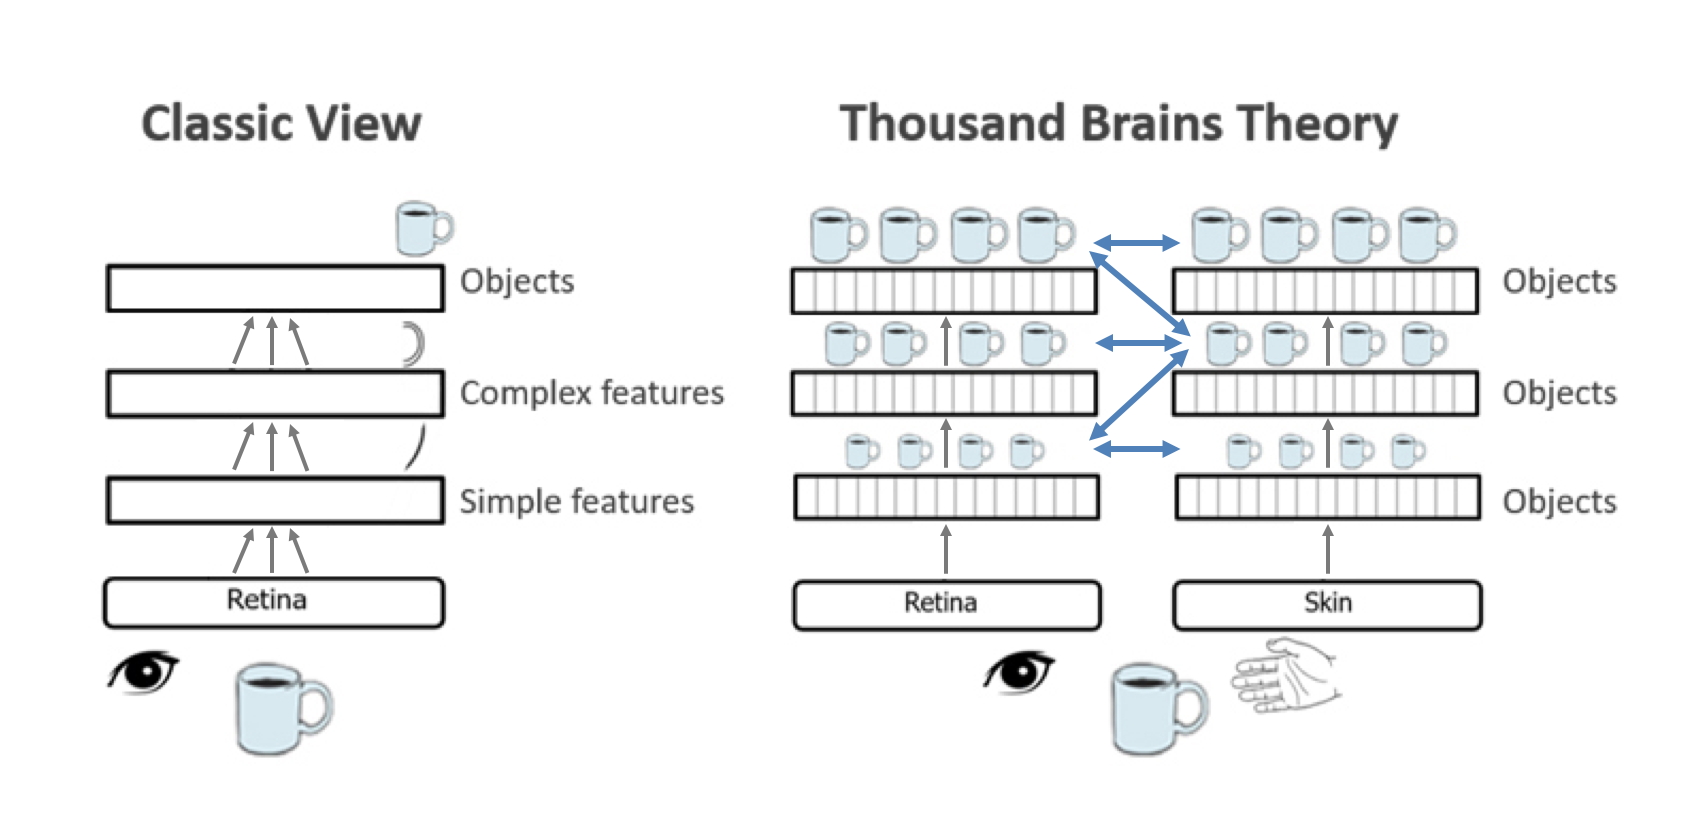 Classic Hierarchy View vs. Thousand Brains